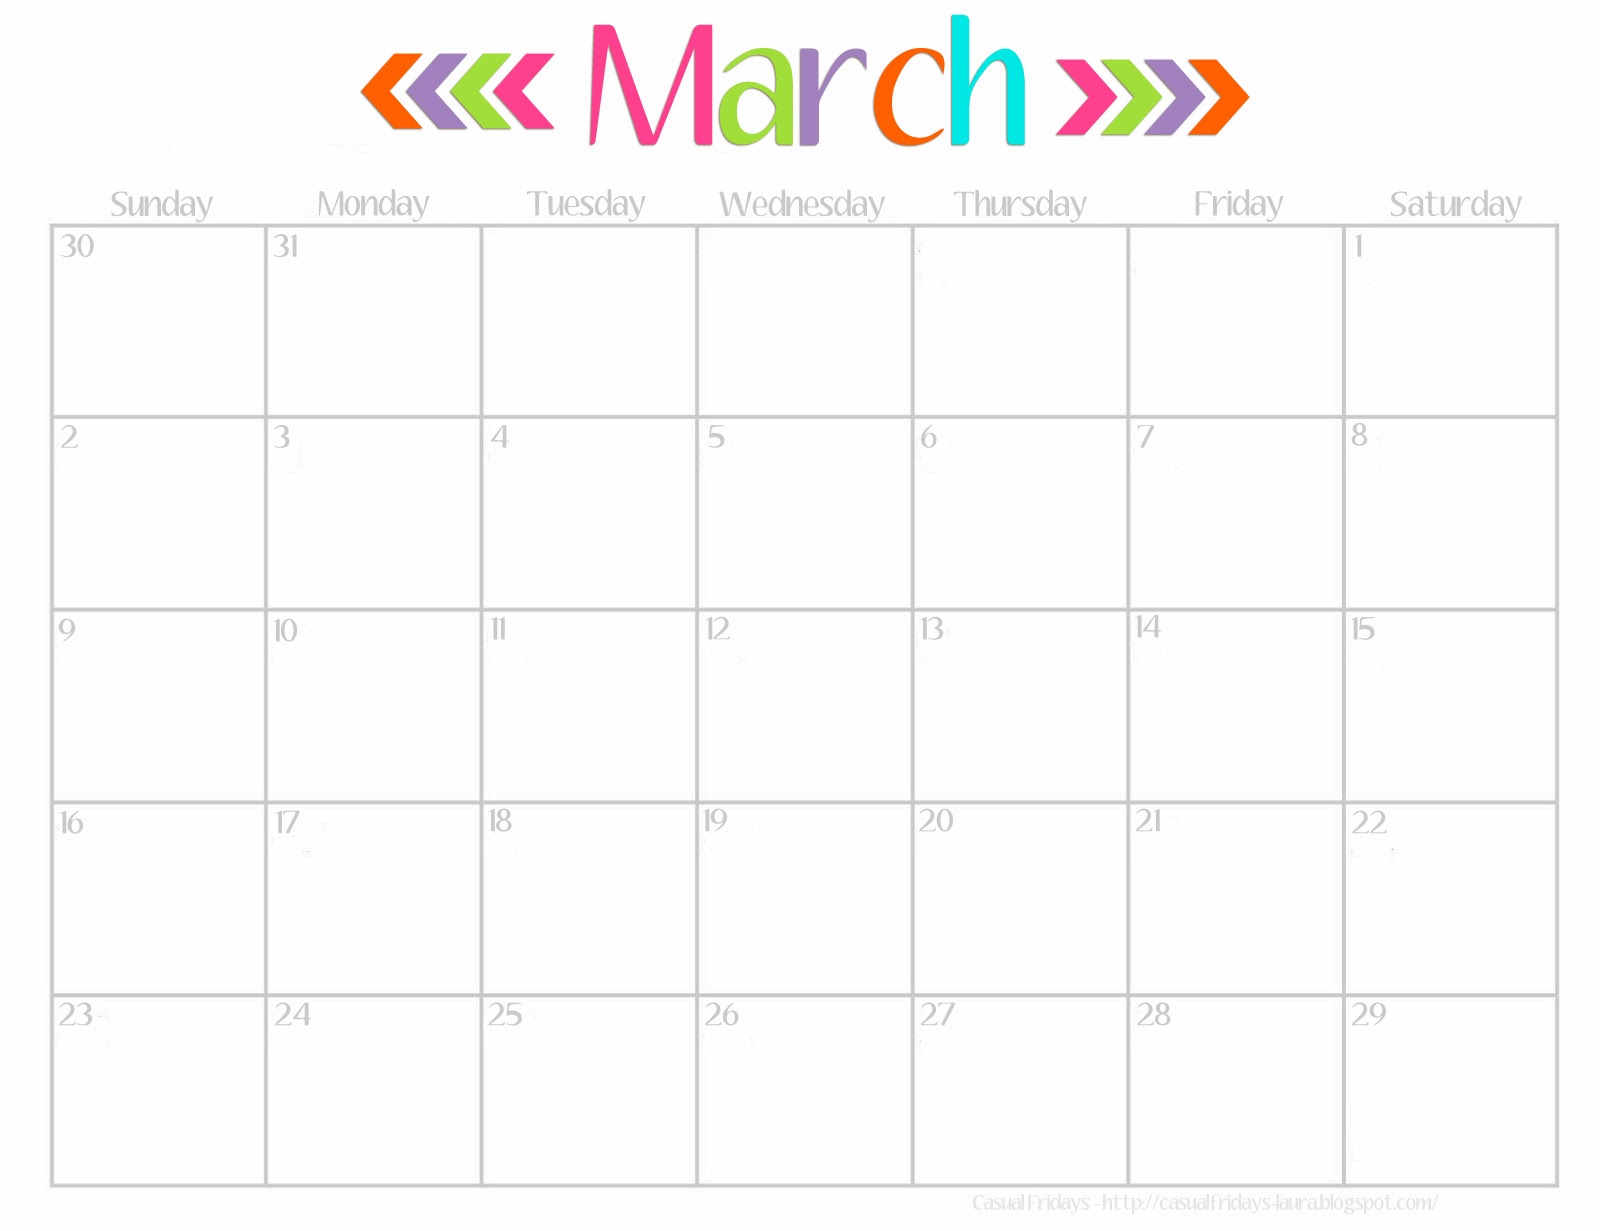 March Calendar Wallpaper Pictures And Jpg Gif Png Image Happy